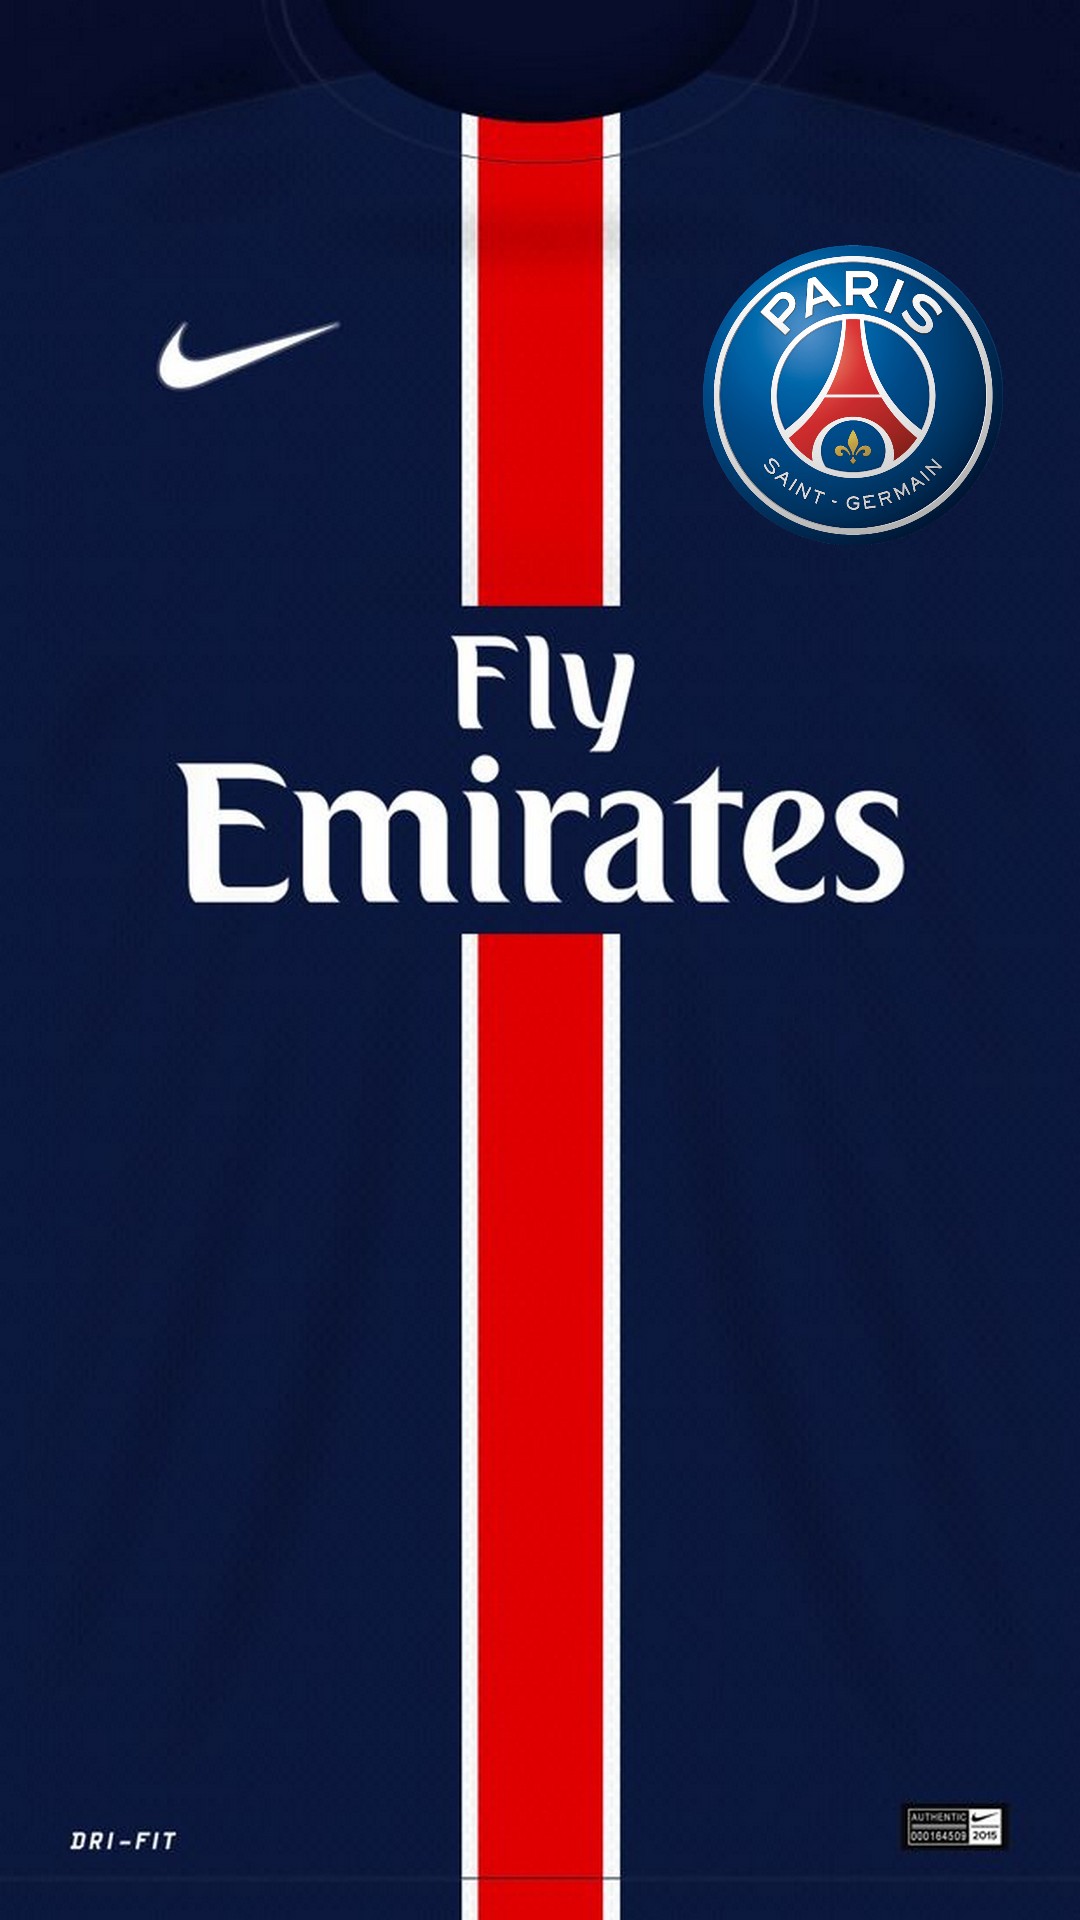 iPhone Wallpaper HD Paris Saint-Germain With Resolution 1080X1920 pixel. You can make this wallpaper for your Mac or Windows Desktop Background, iPhone, Android or Tablet and another Smartphone device for free